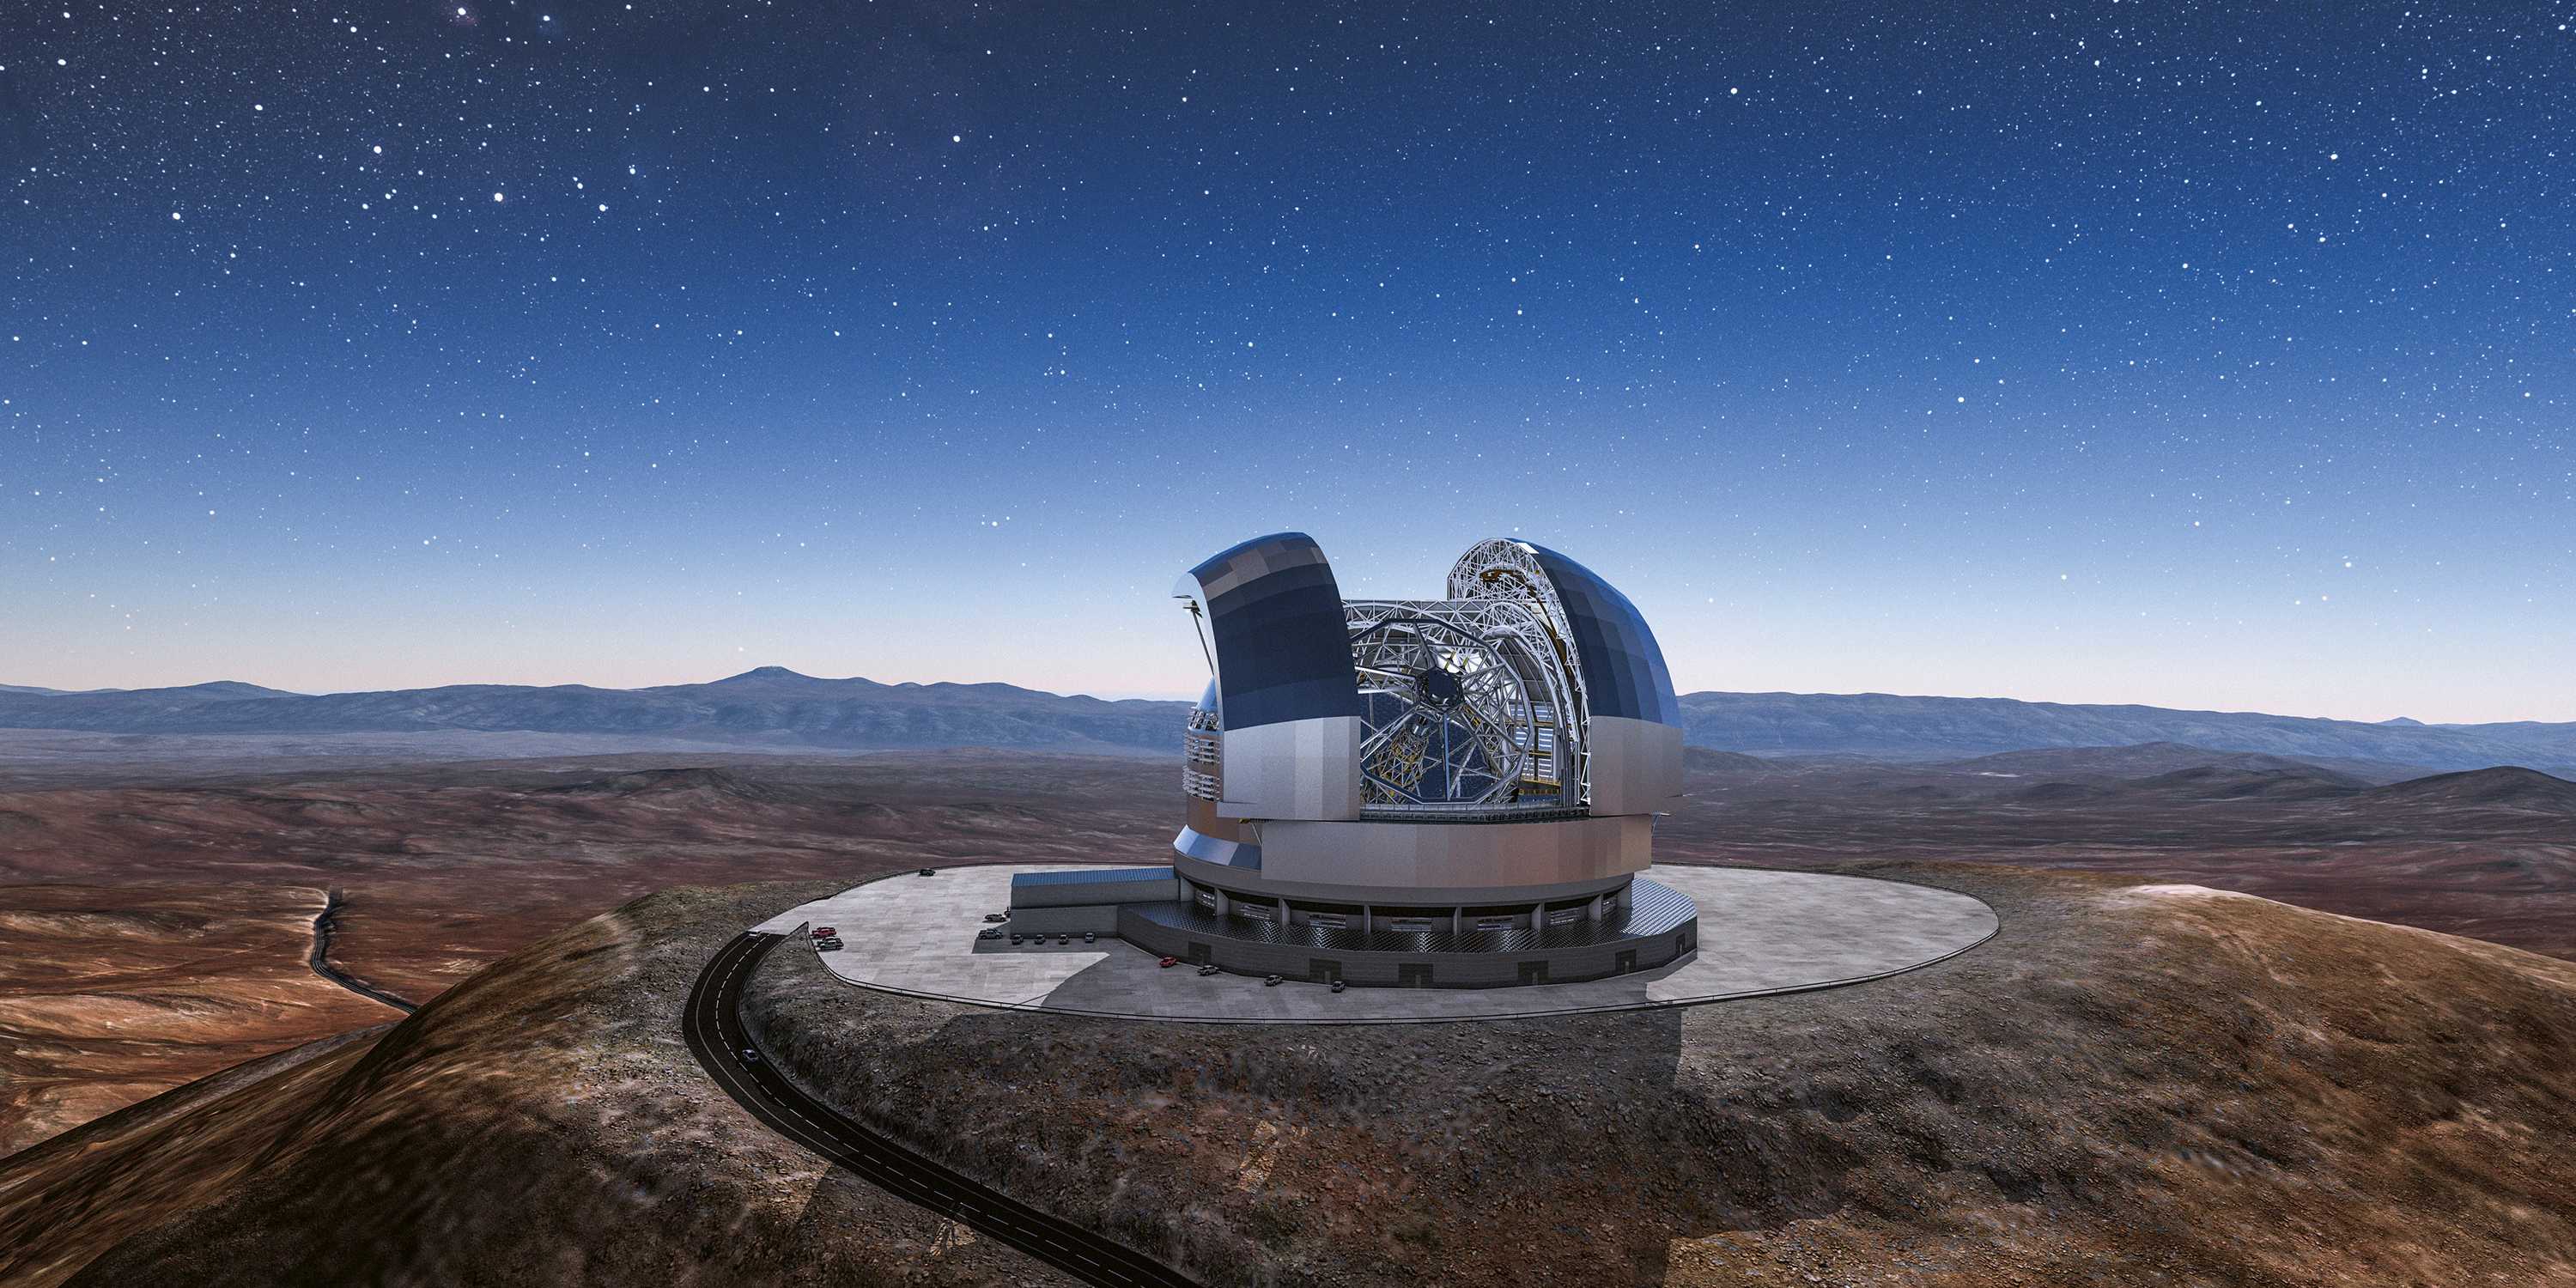 An artist's rendering of the Extremely Large Telecope (ELT) in the desert.